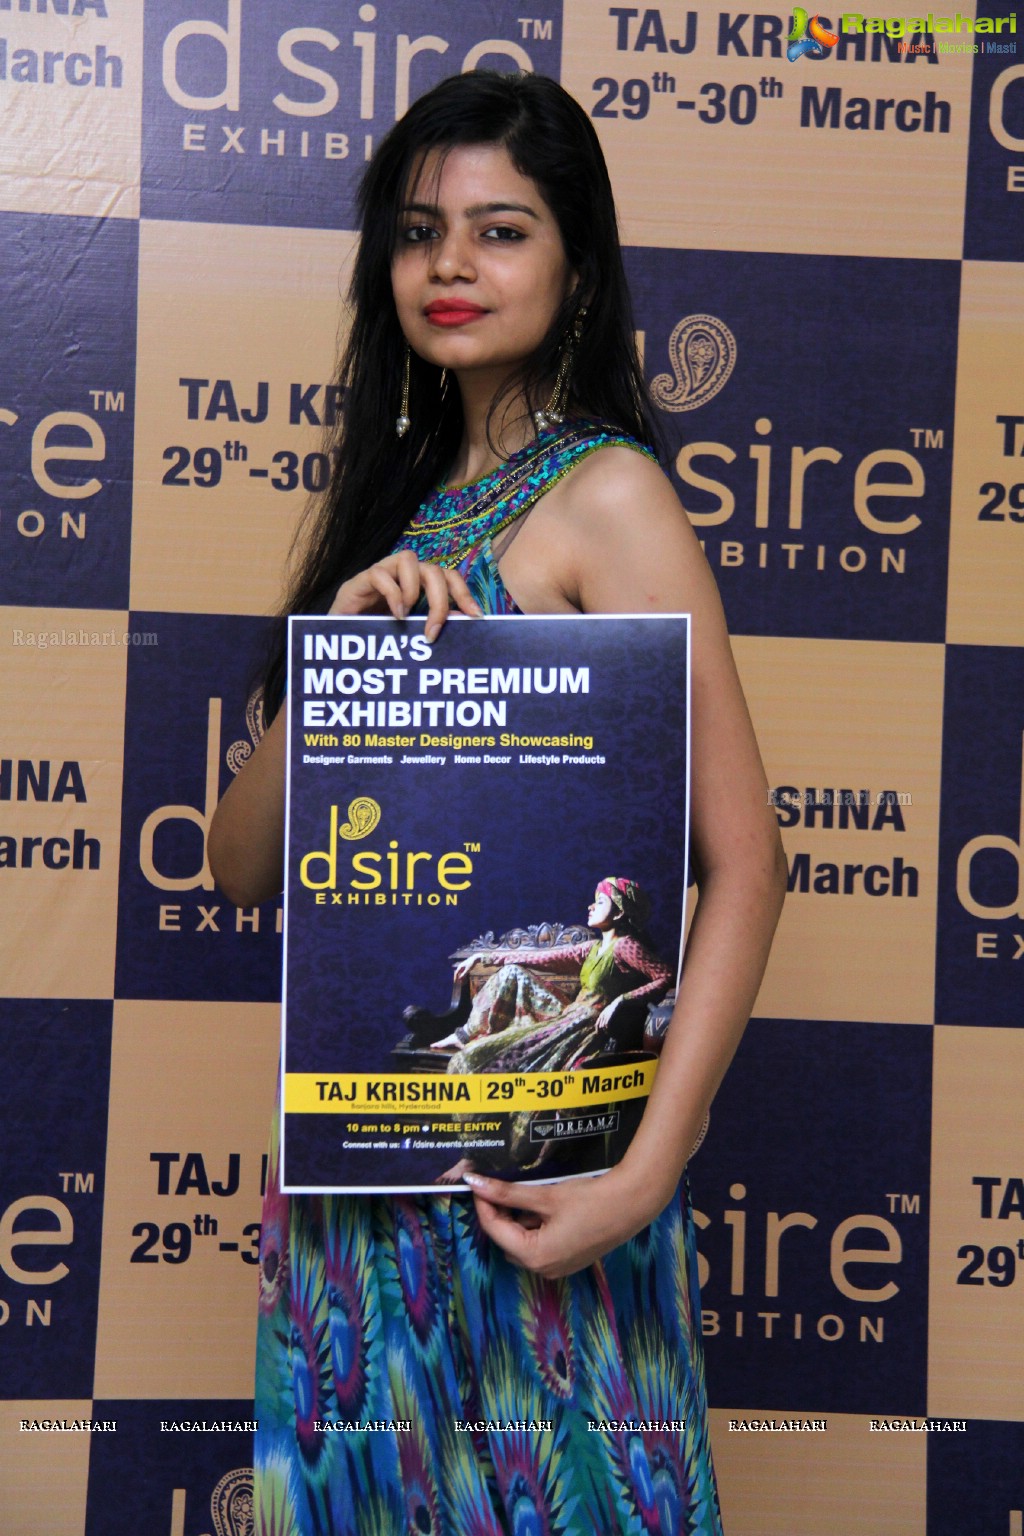 D'sire Exhibition and Sale (March 2016) Curtain Raiser at Marks Media Center, Hyderabad